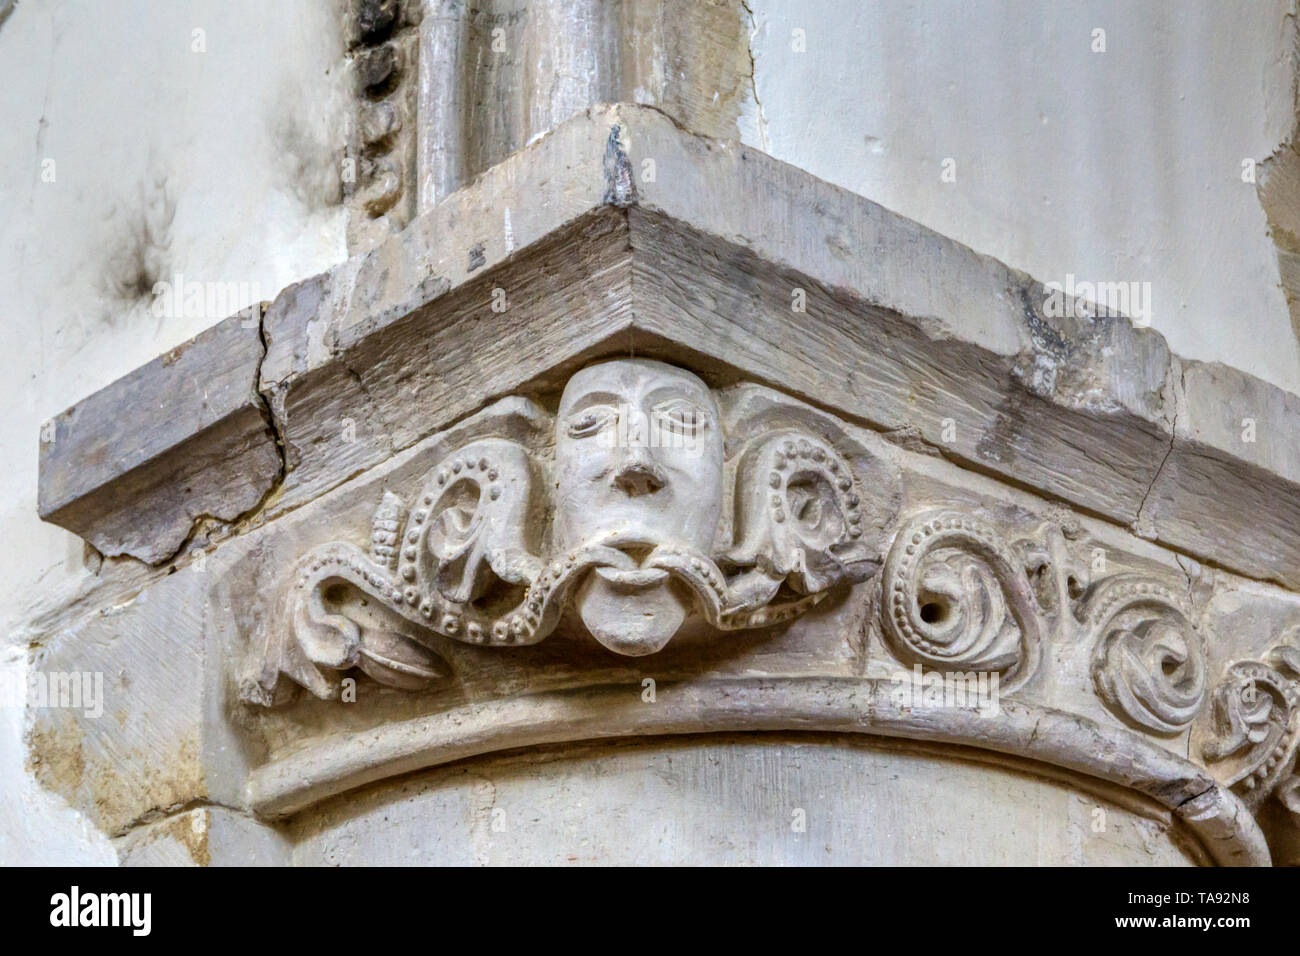 Green man carved on the capital of a Norman pillar in St Nicholas church at St Nicholas-at-Wade in Kent. Stock Photo